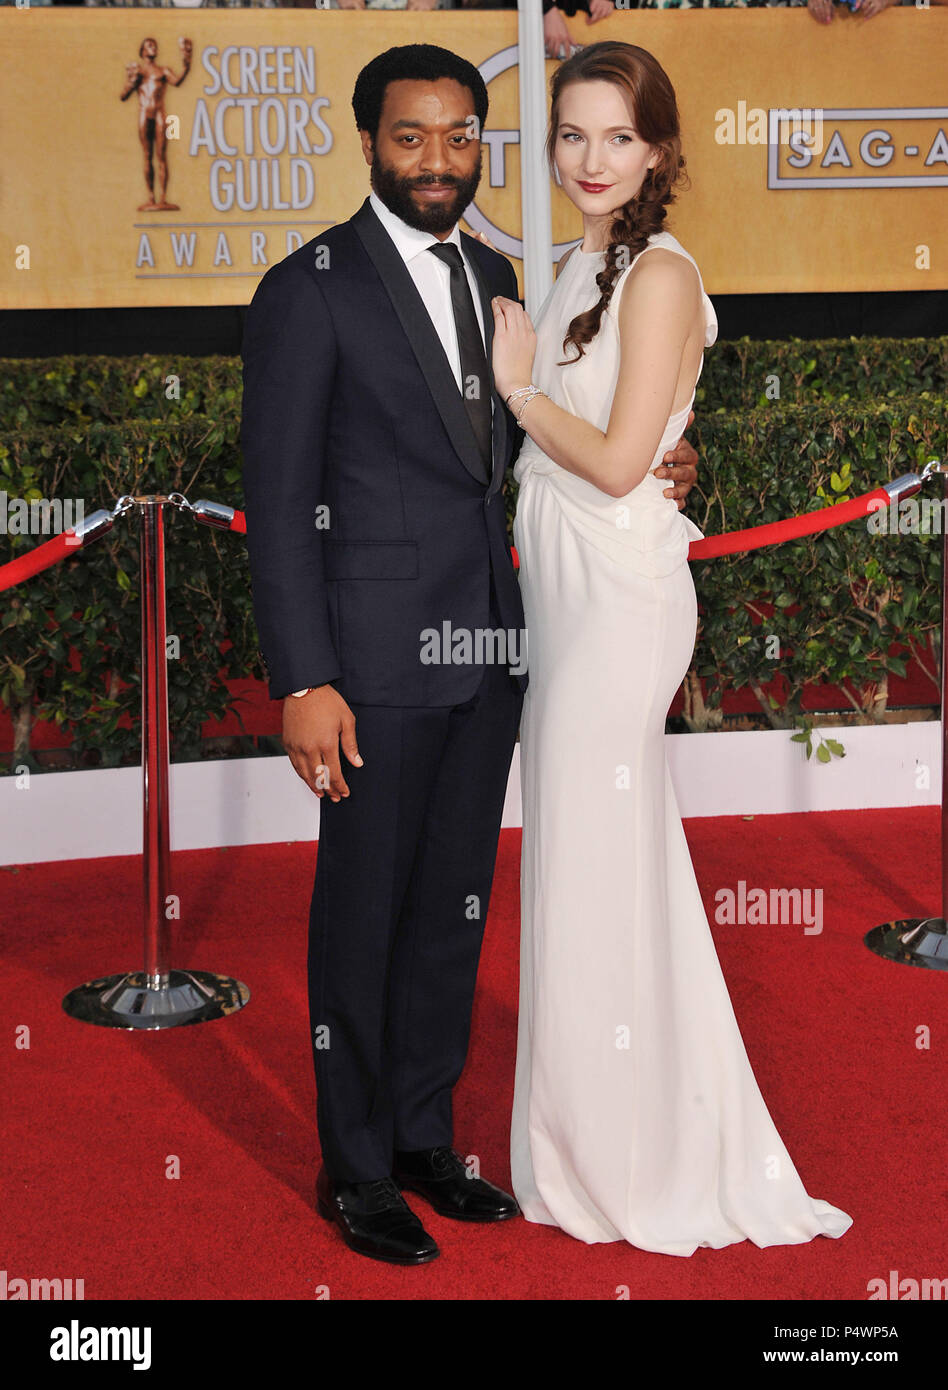 Sari Mercer, Chiwetel Ejiofor  arriving at the 20th SAG Awards 2014 at the Shrine Auditorium in Los Angeles.Sari Mercer, Chiwetel Ejiofor  ------------- Red Carpet Event, Vertical, USA, Film Industry, Celebrities,  Photography, Bestof, Arts Culture and Entertainment, Topix Celebrities fashion /  Vertical, Best of, Event in Hollywood Life - California,  Red Carpet and backstage, USA, Film Industry, Celebrities,  movie celebrities, TV celebrities, Music celebrities, Photography, Bestof, Arts Culture and Entertainment,  Topix, vertical,  family from from the year , 2014, inquiry tsuni@Gamma-USA.c Stock Photo